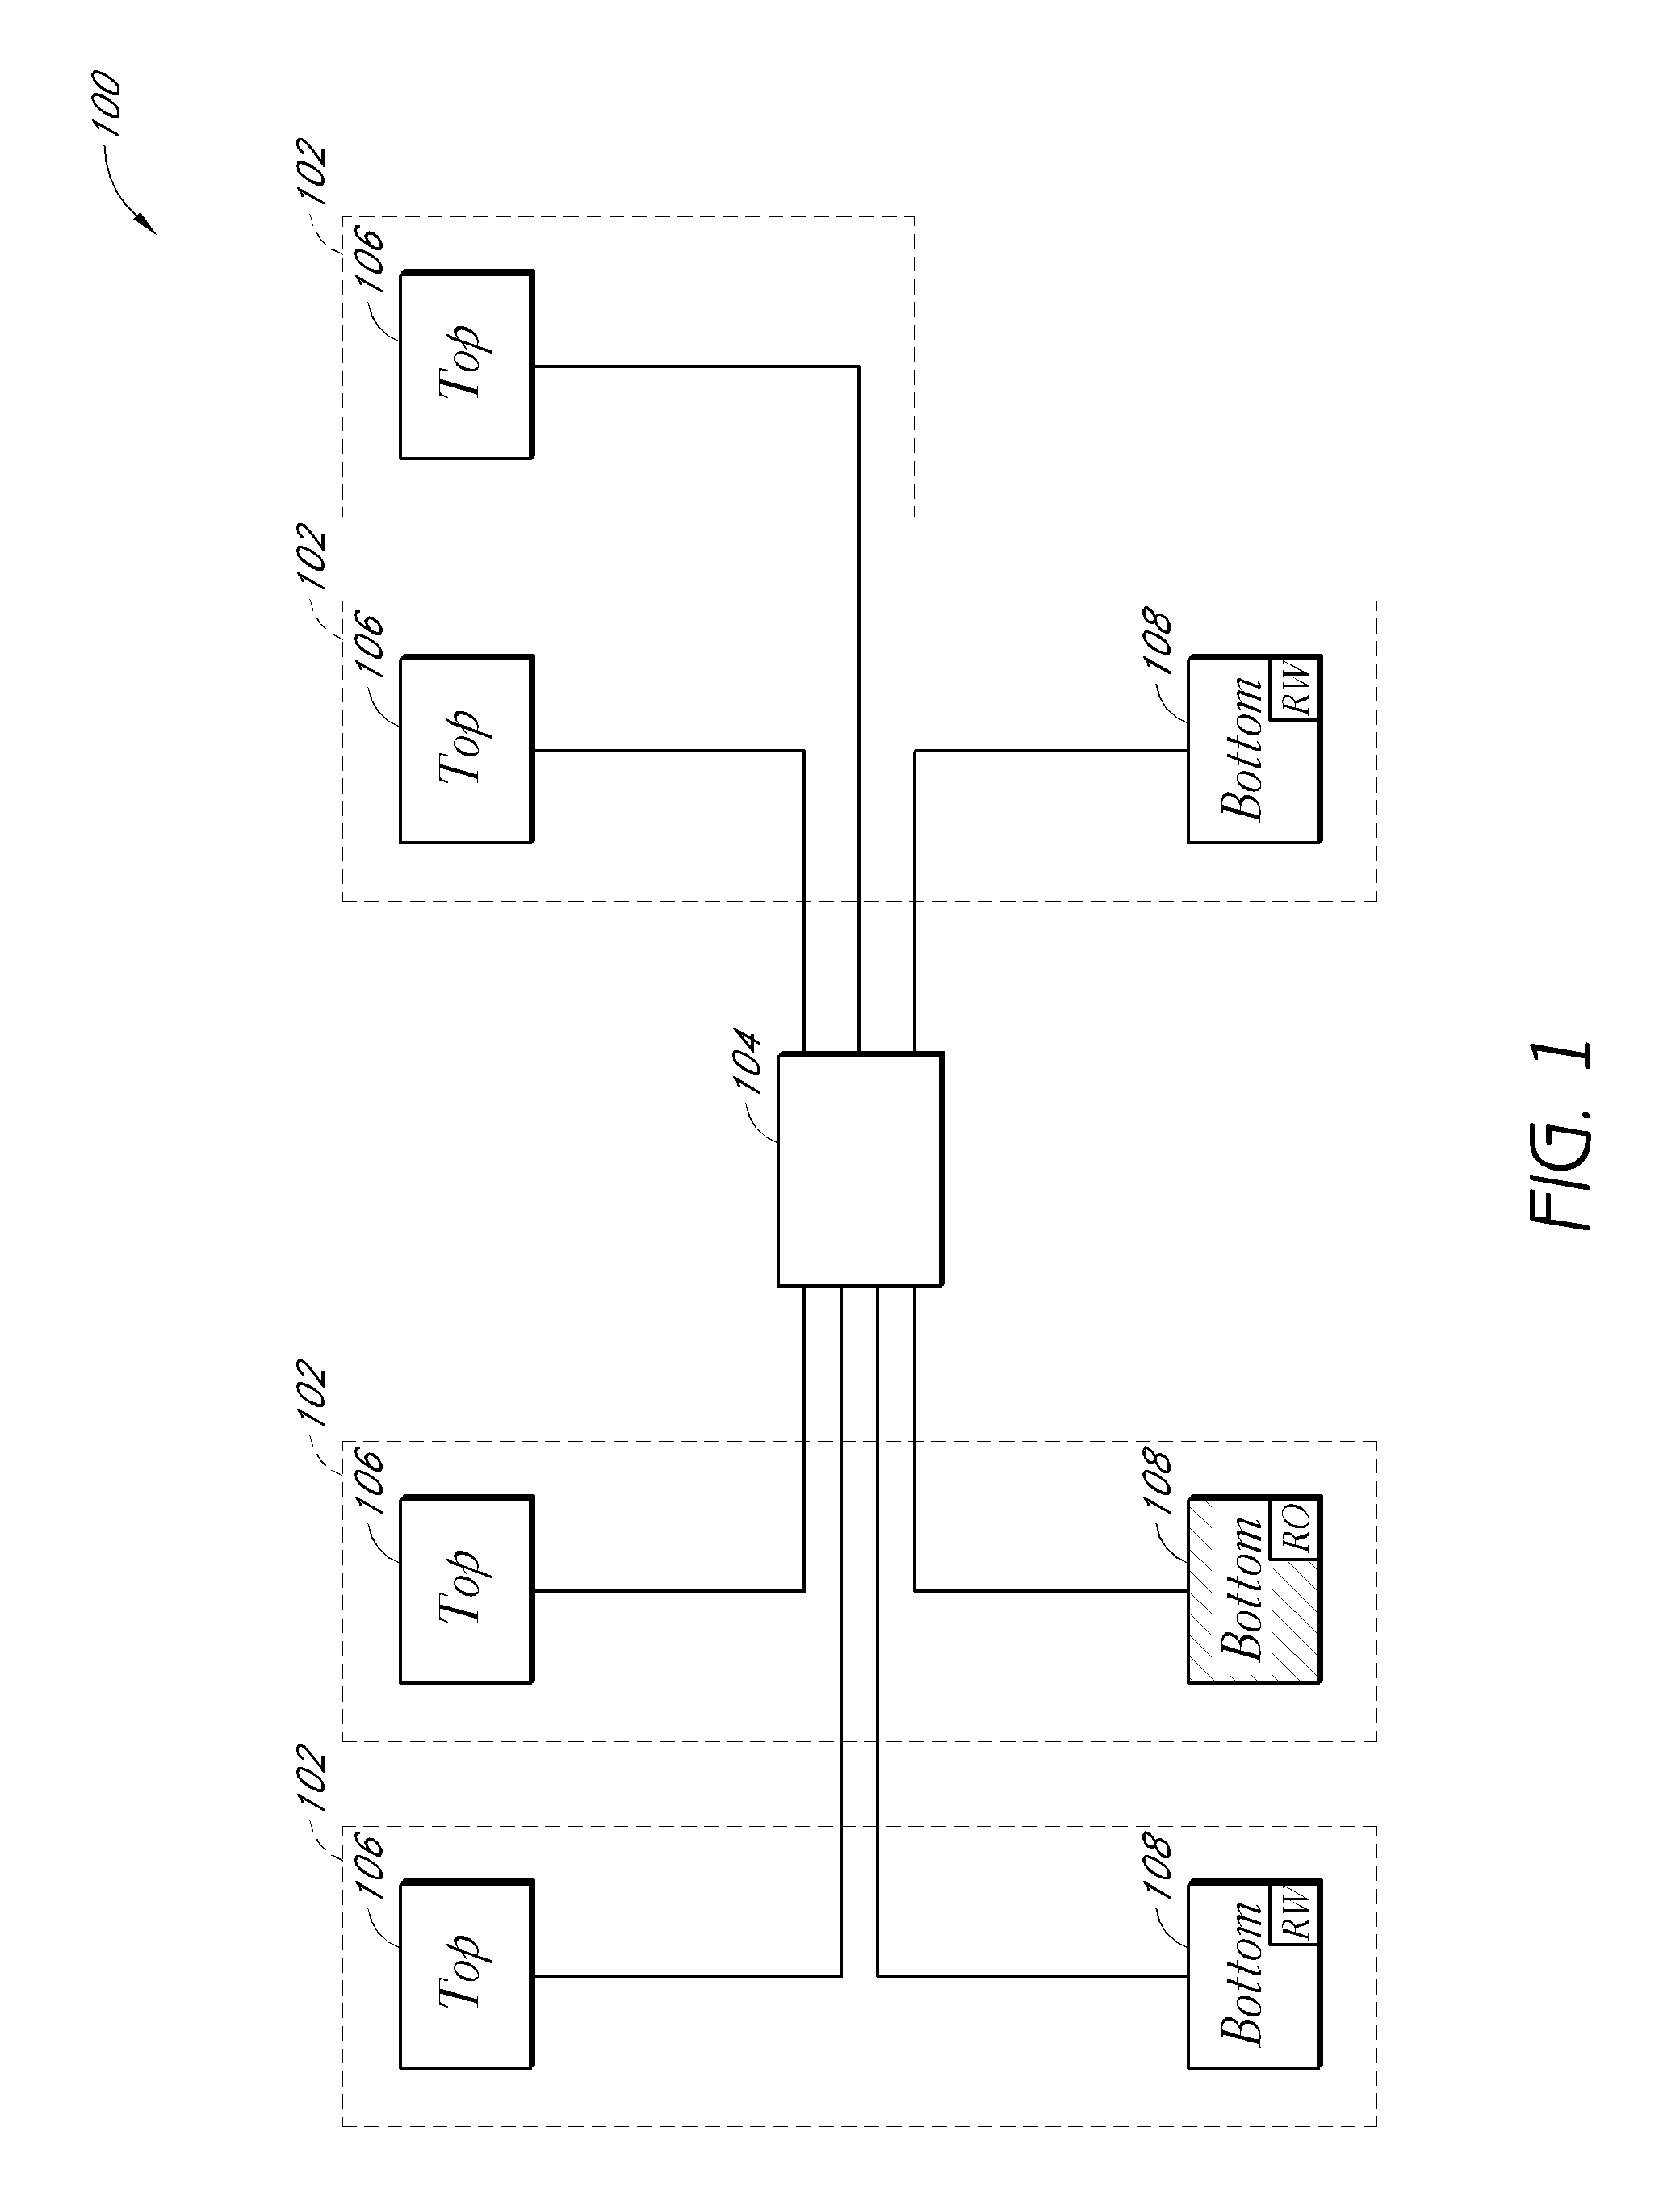 Systems and methods for a read only mode for a portion of a storage system